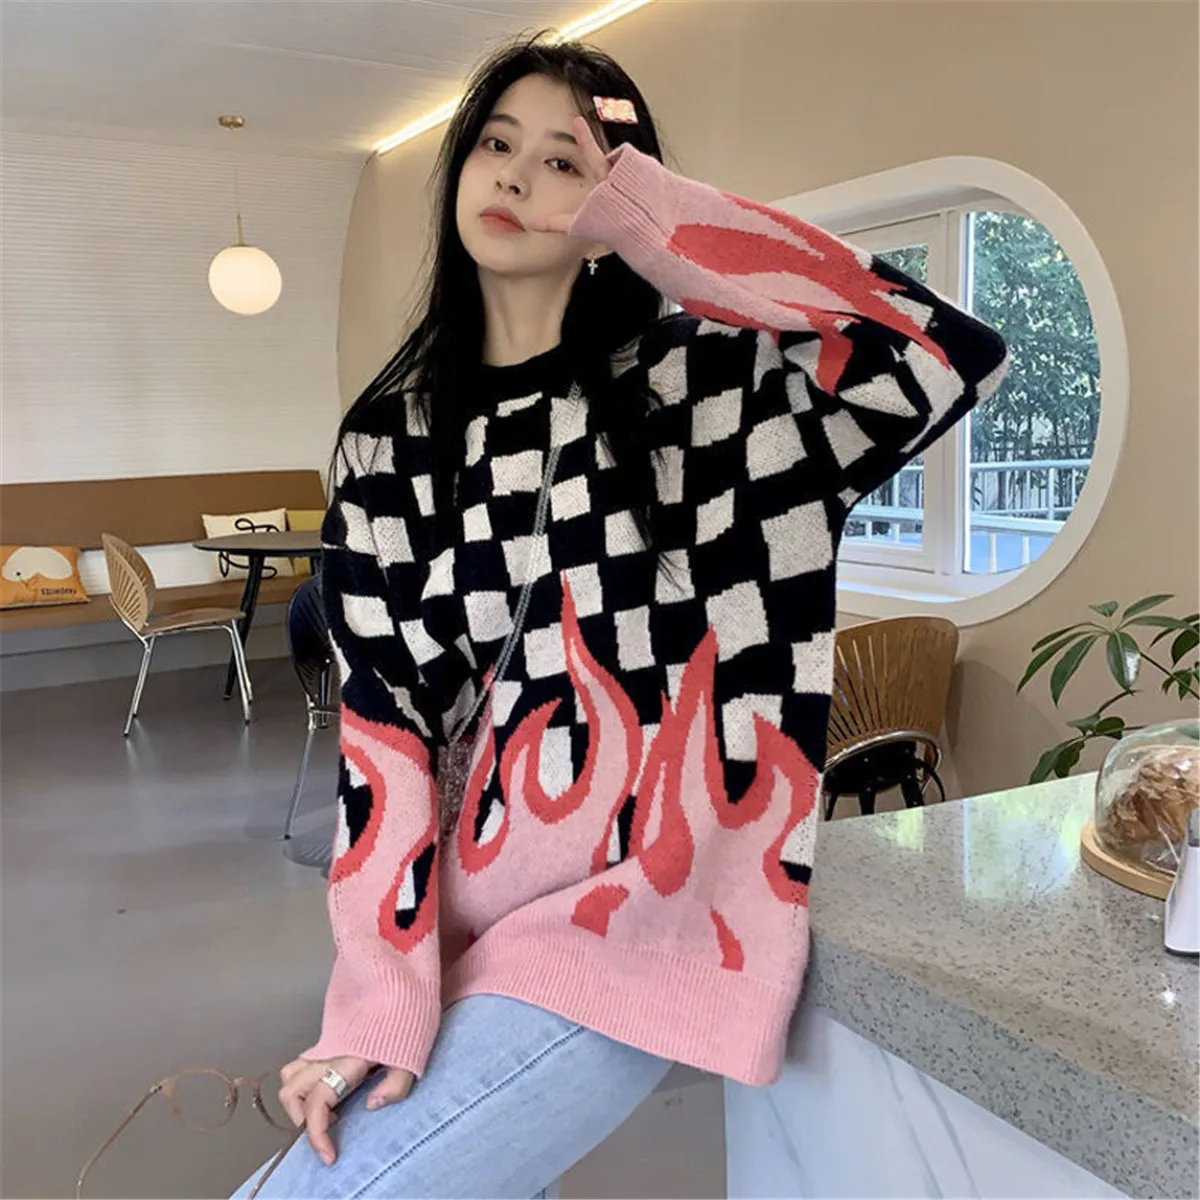 

Cool Flame Autumn Knitted Female Pullovers Sweater Long Sleeve Streetwear O-Neck Amine Women Warm Funny Spring Plaid Tops Girls